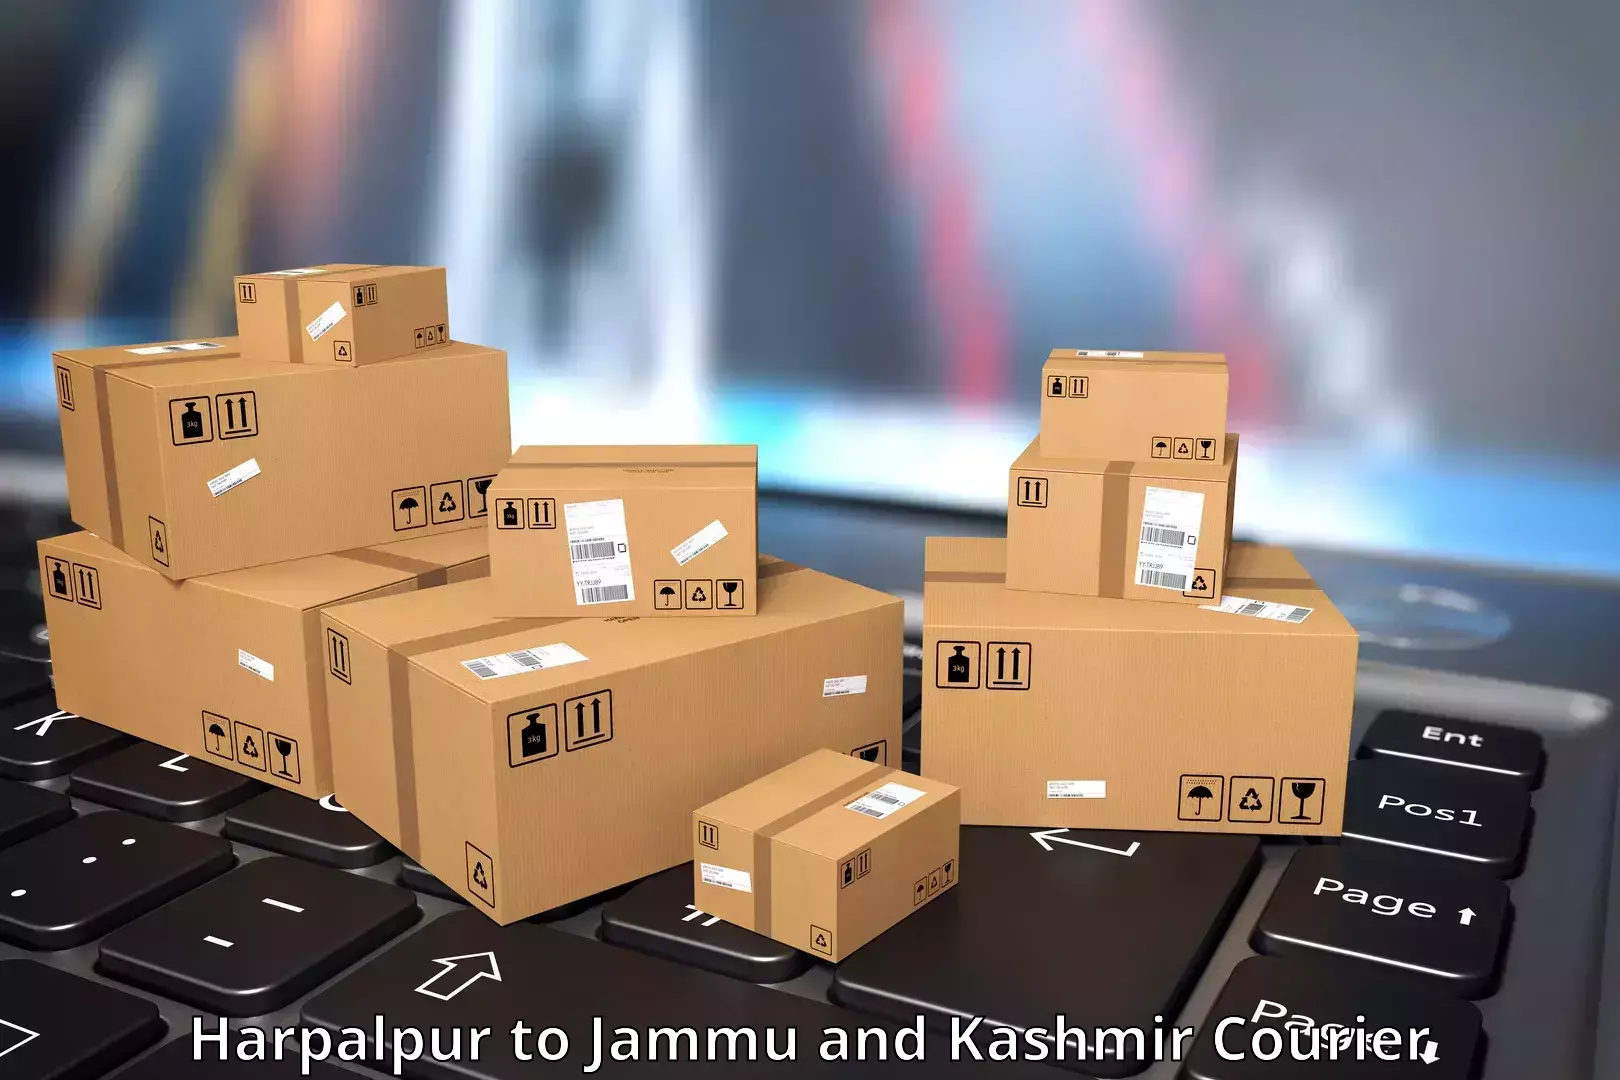 High-priority parcel service Harpalpur to Jammu and Kashmir